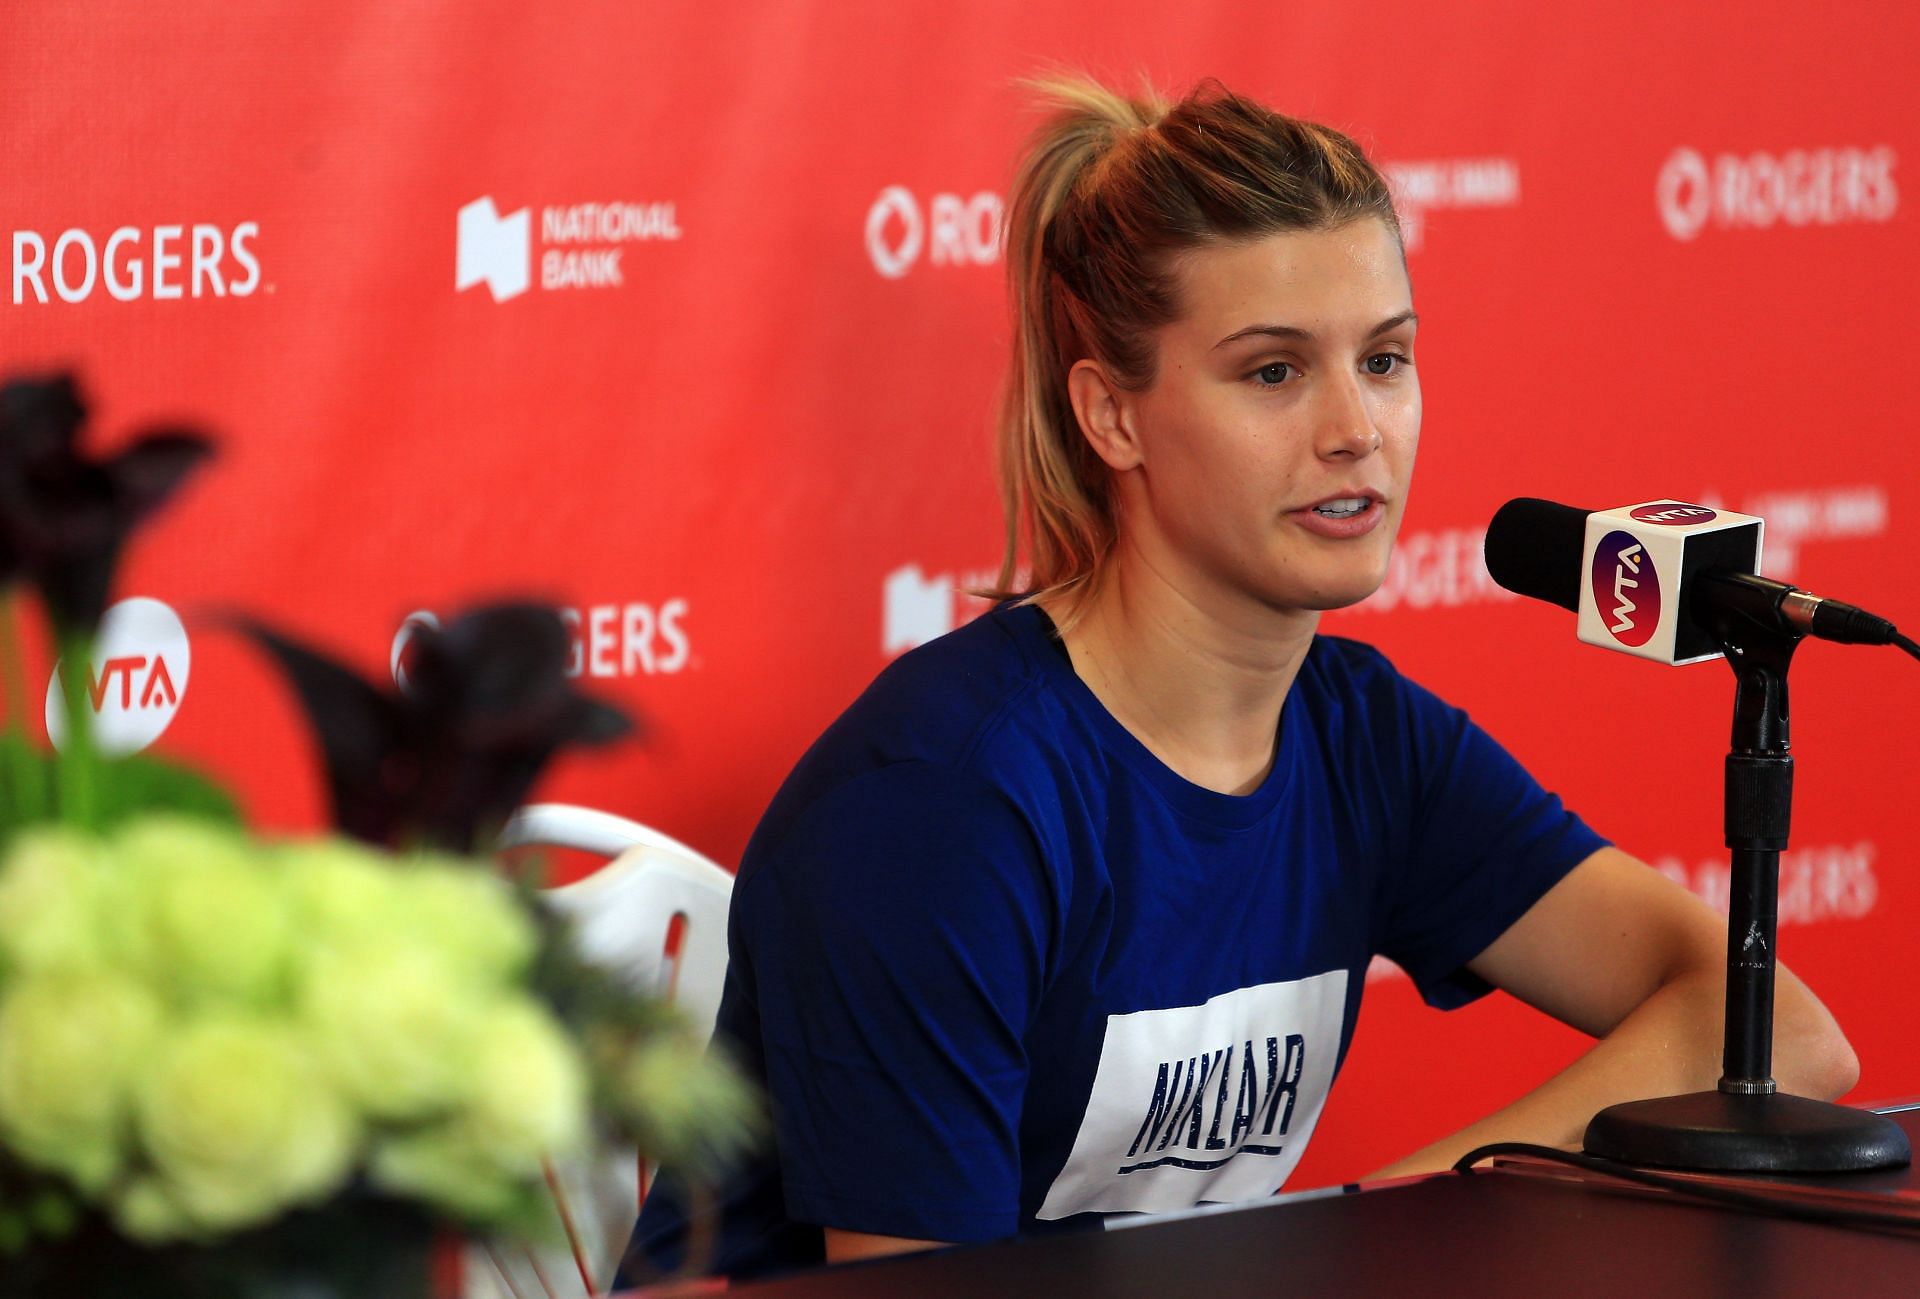 Eugenie Bouchard at the Rogers Cup